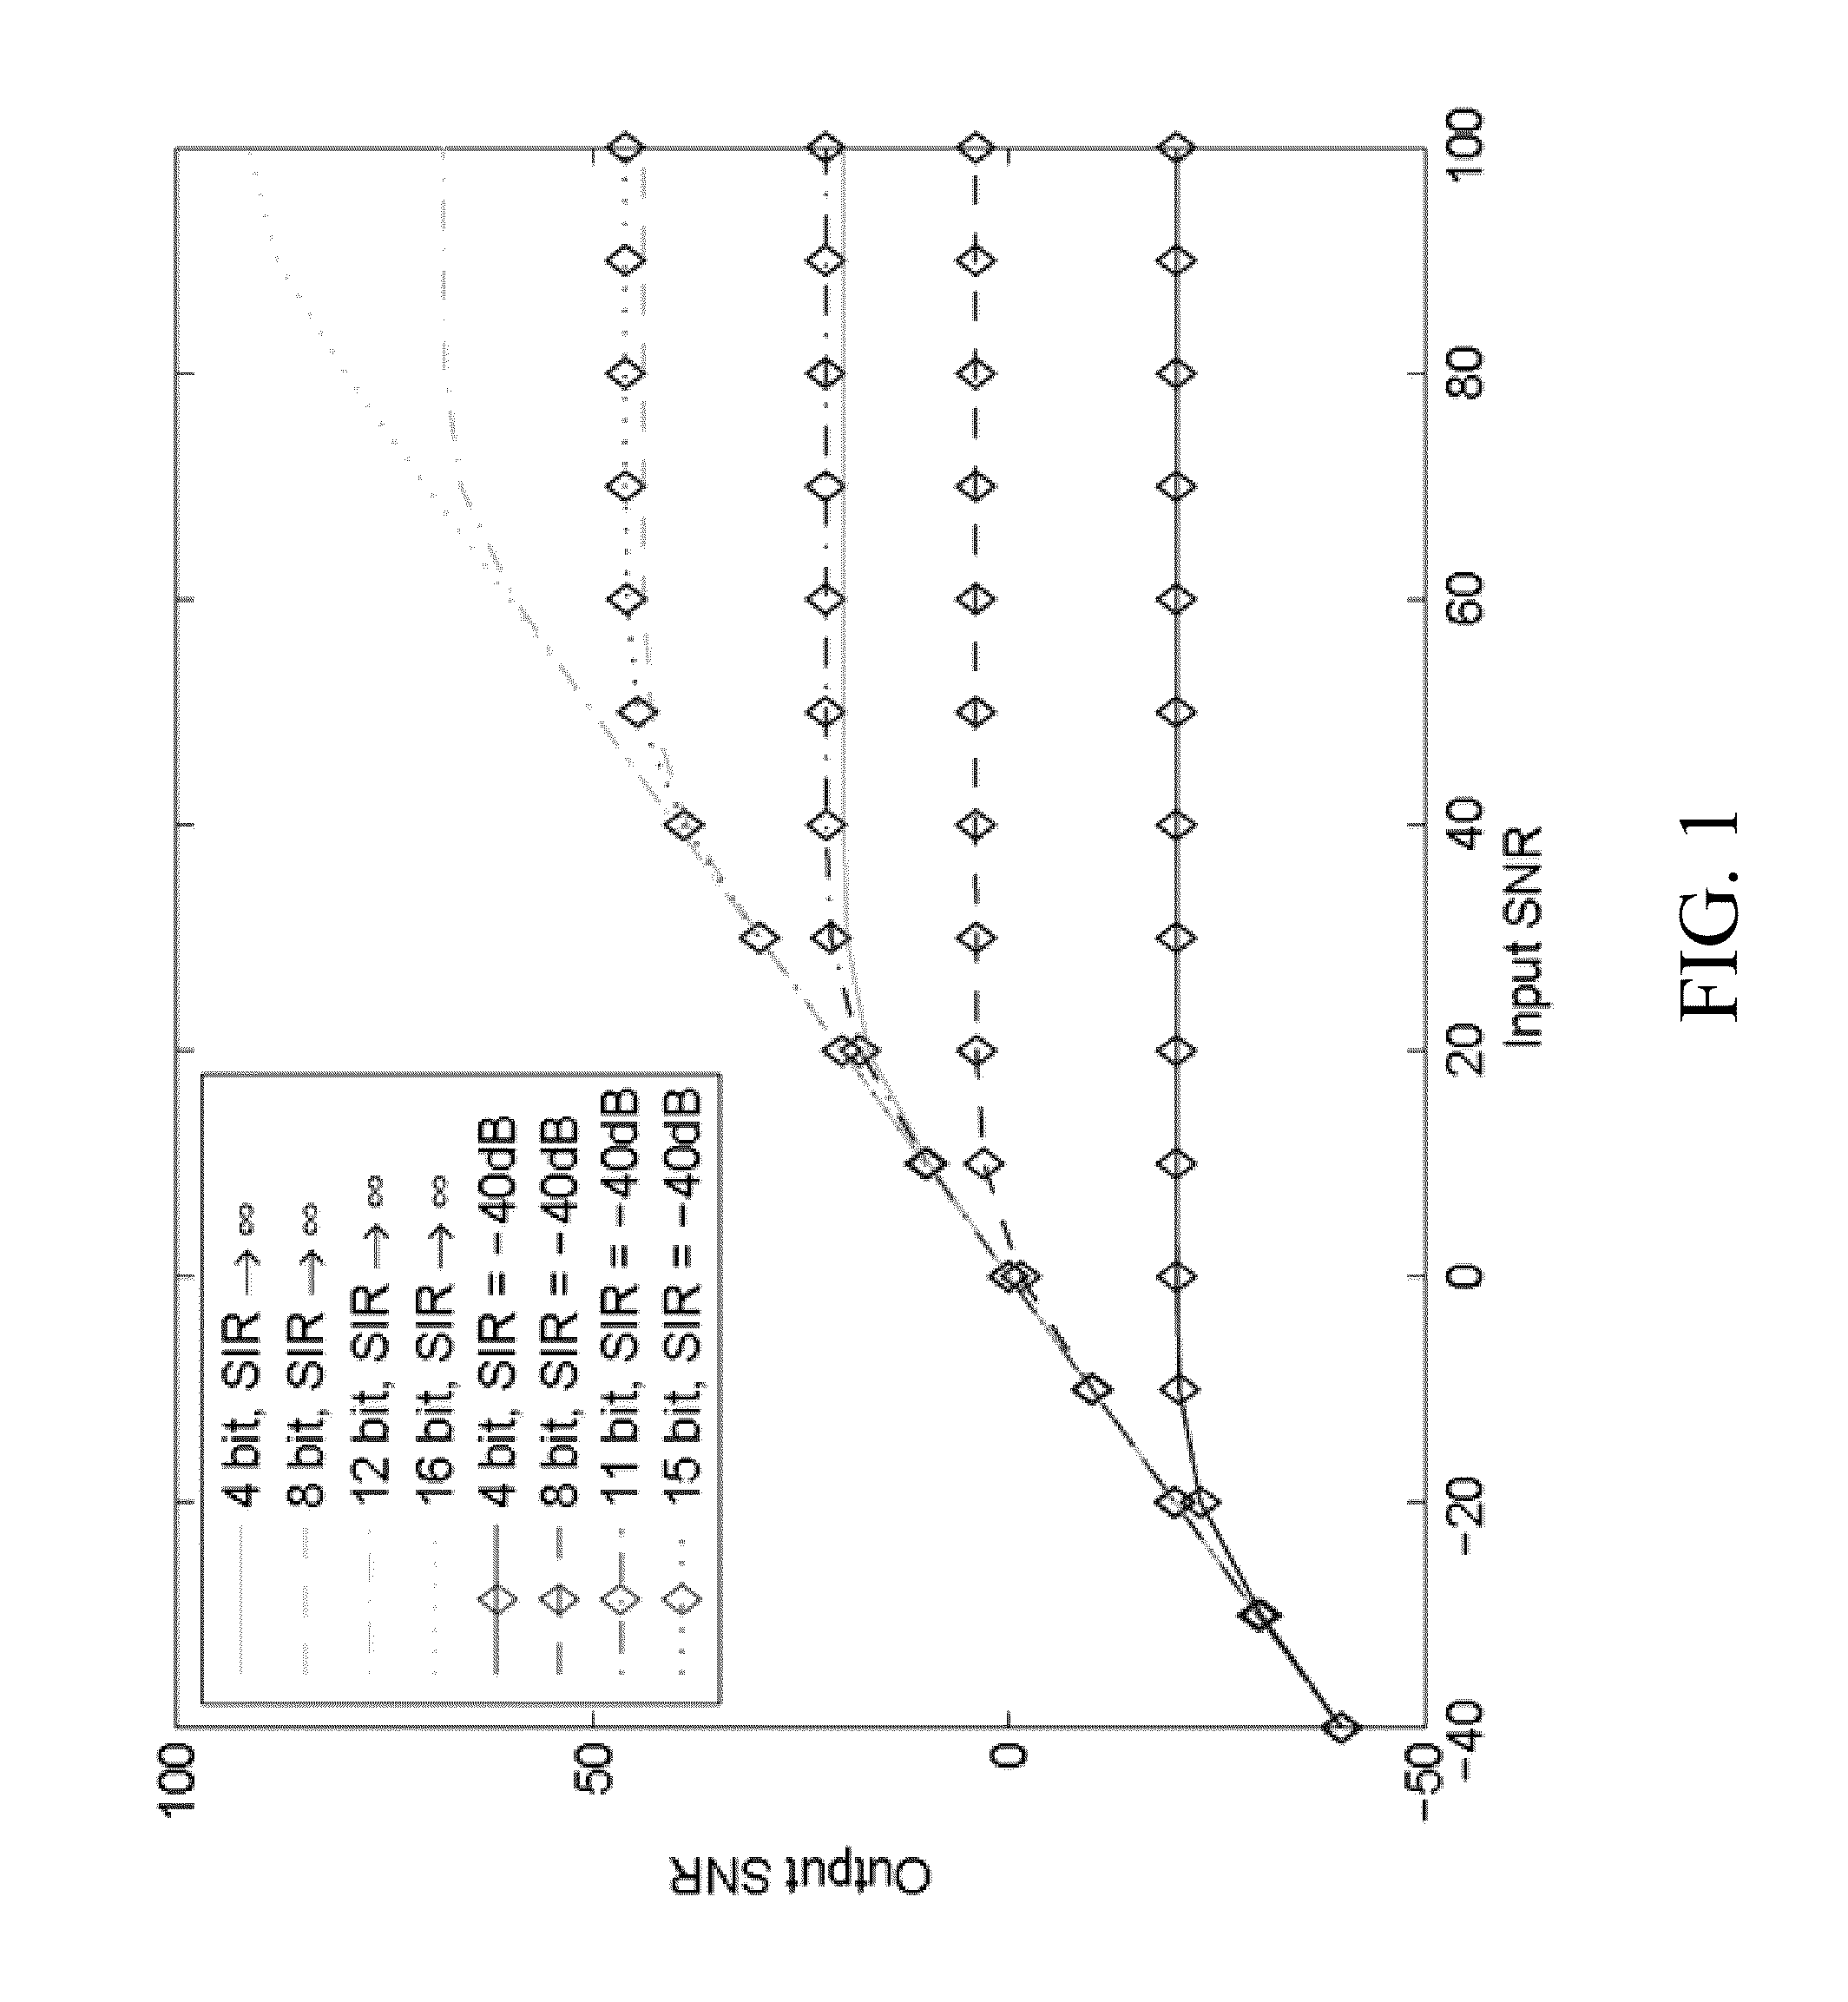 Interference Cancellation for Full-Duplex Communications